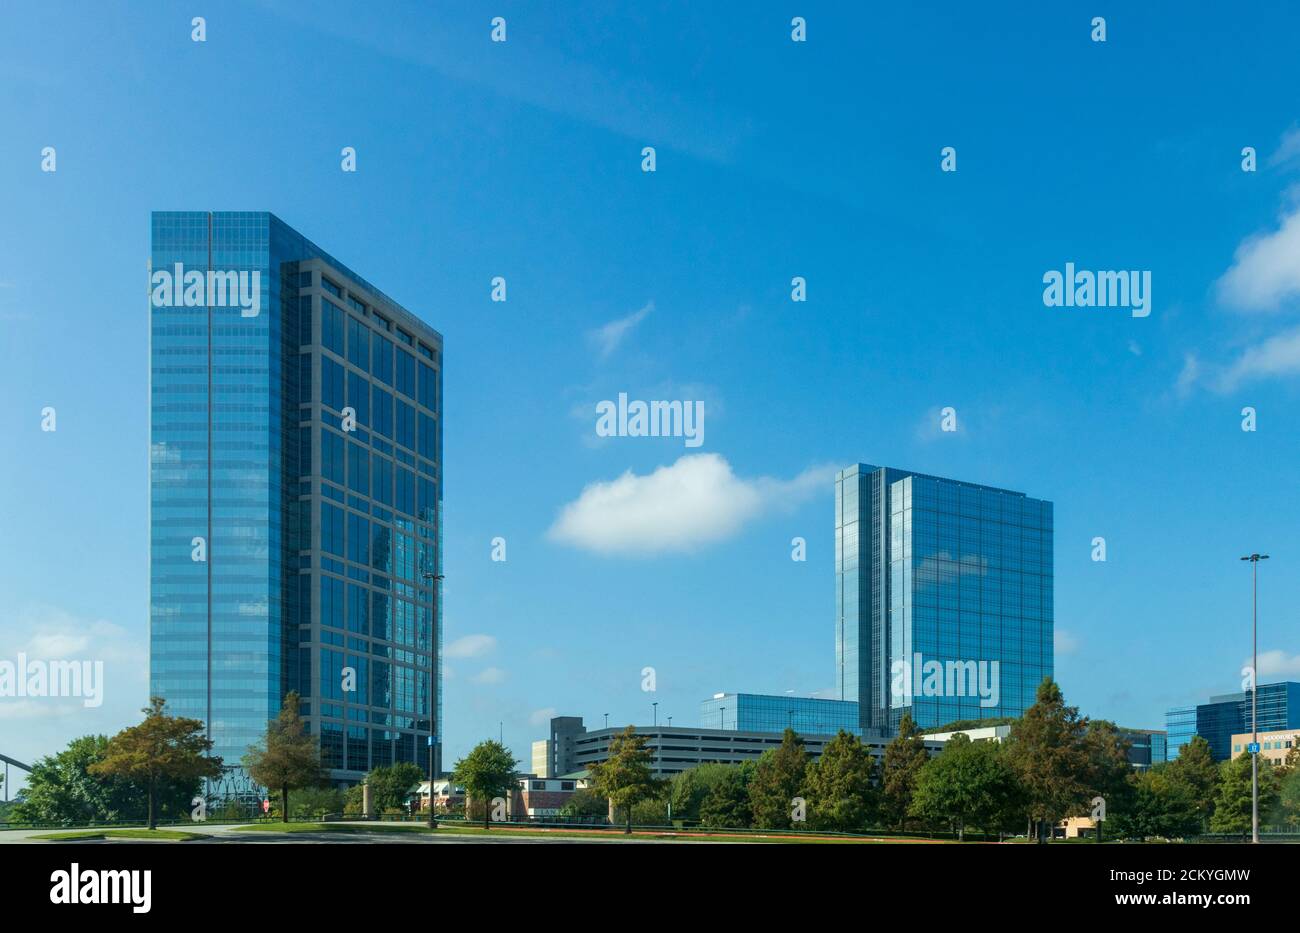 The Allison Tower and the Hackett Tower (formerly the Anadarko Towers) in The Woodlands, Texas. Stock Photo